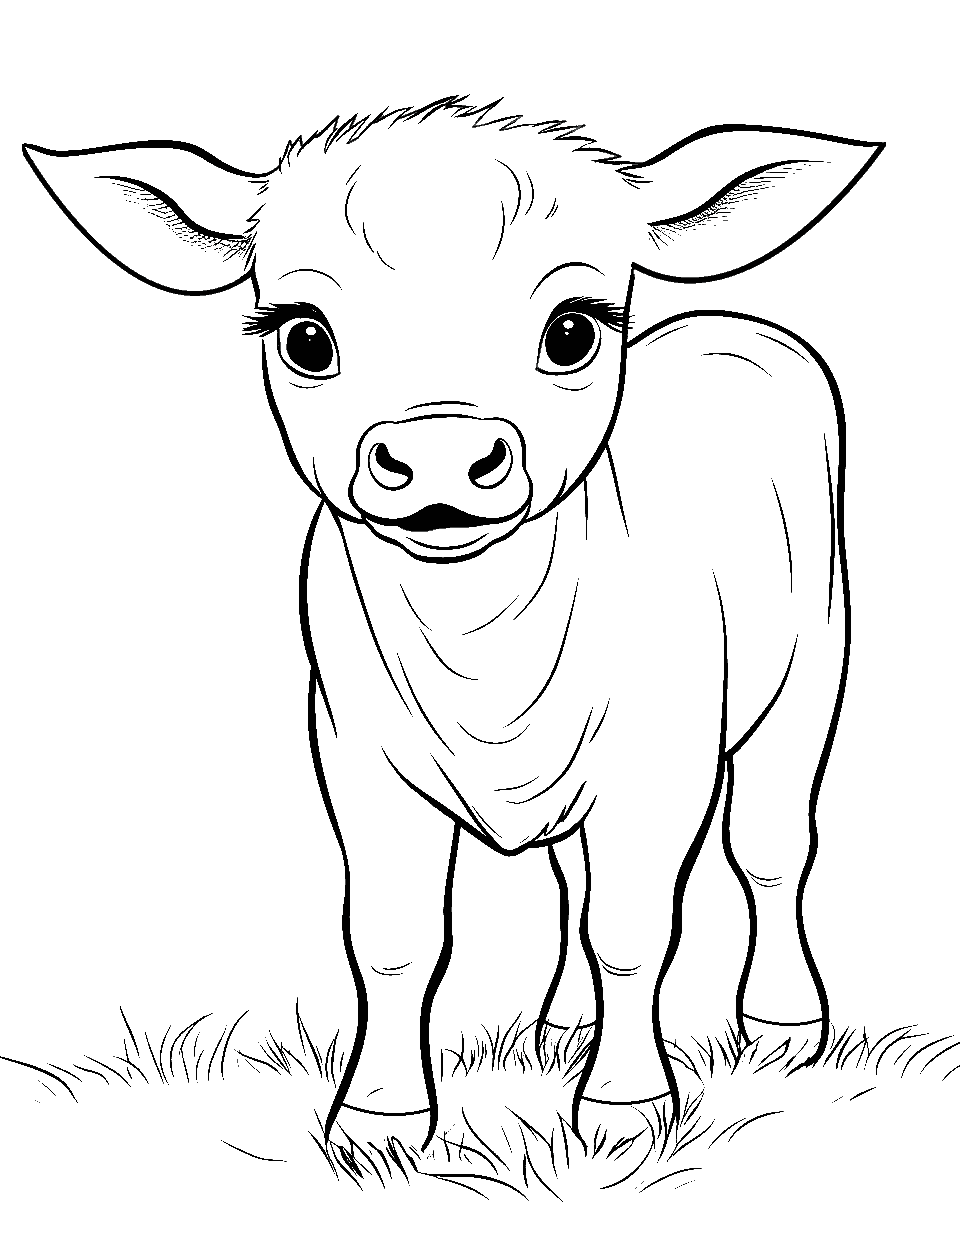 35 Cow Coloring Pages: Free Printable Sheets